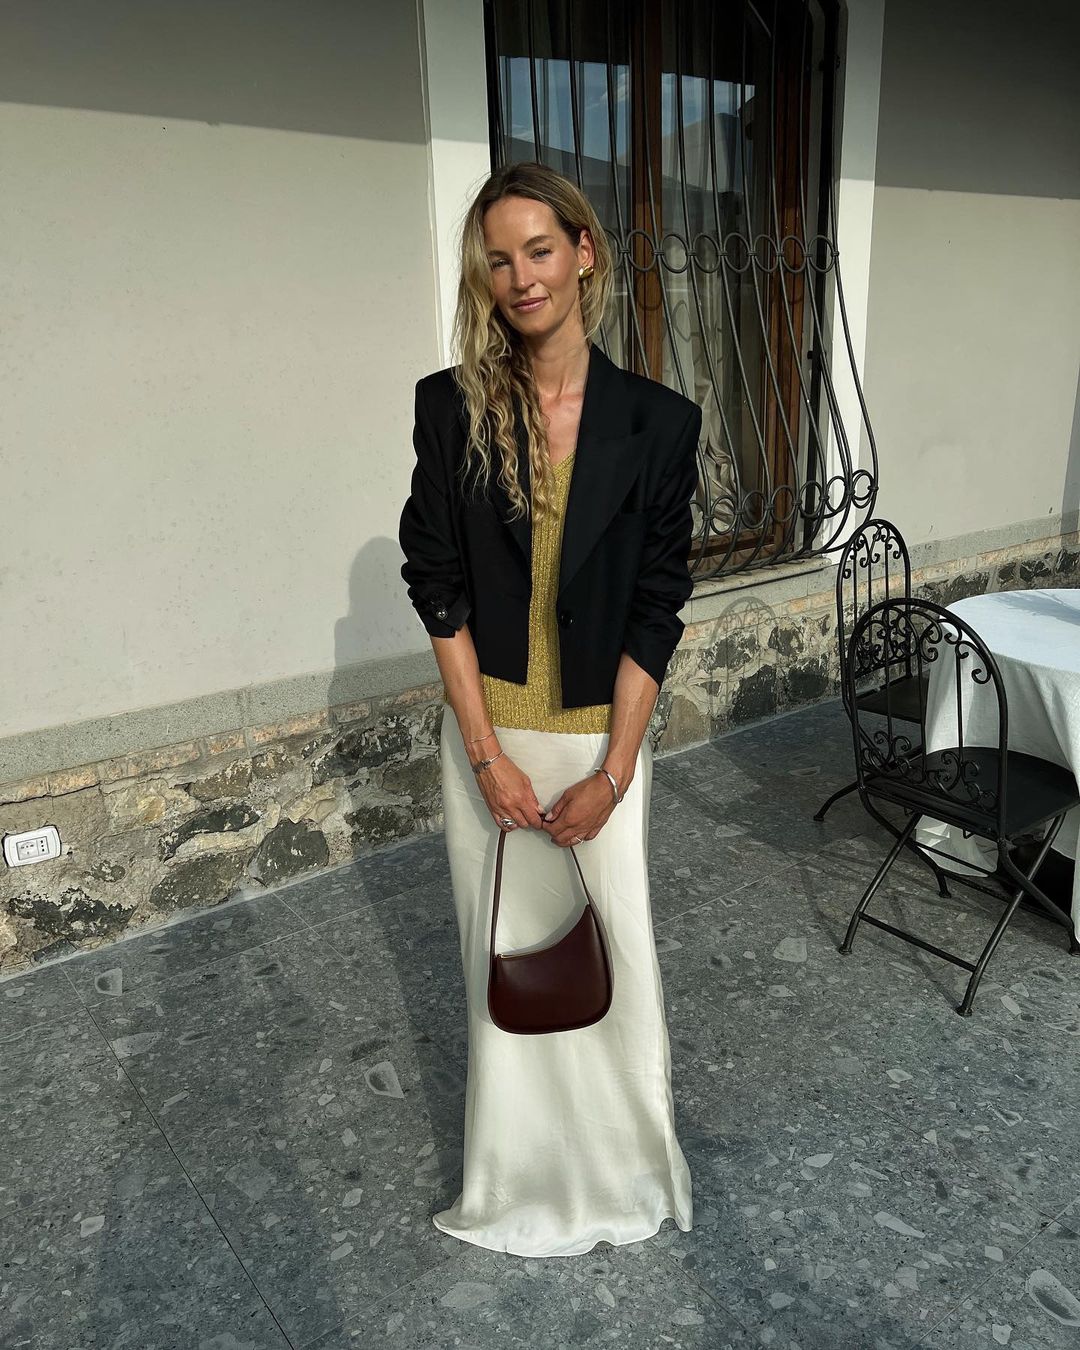 Anouk Yve wearing the Half Moon bag by The Row.